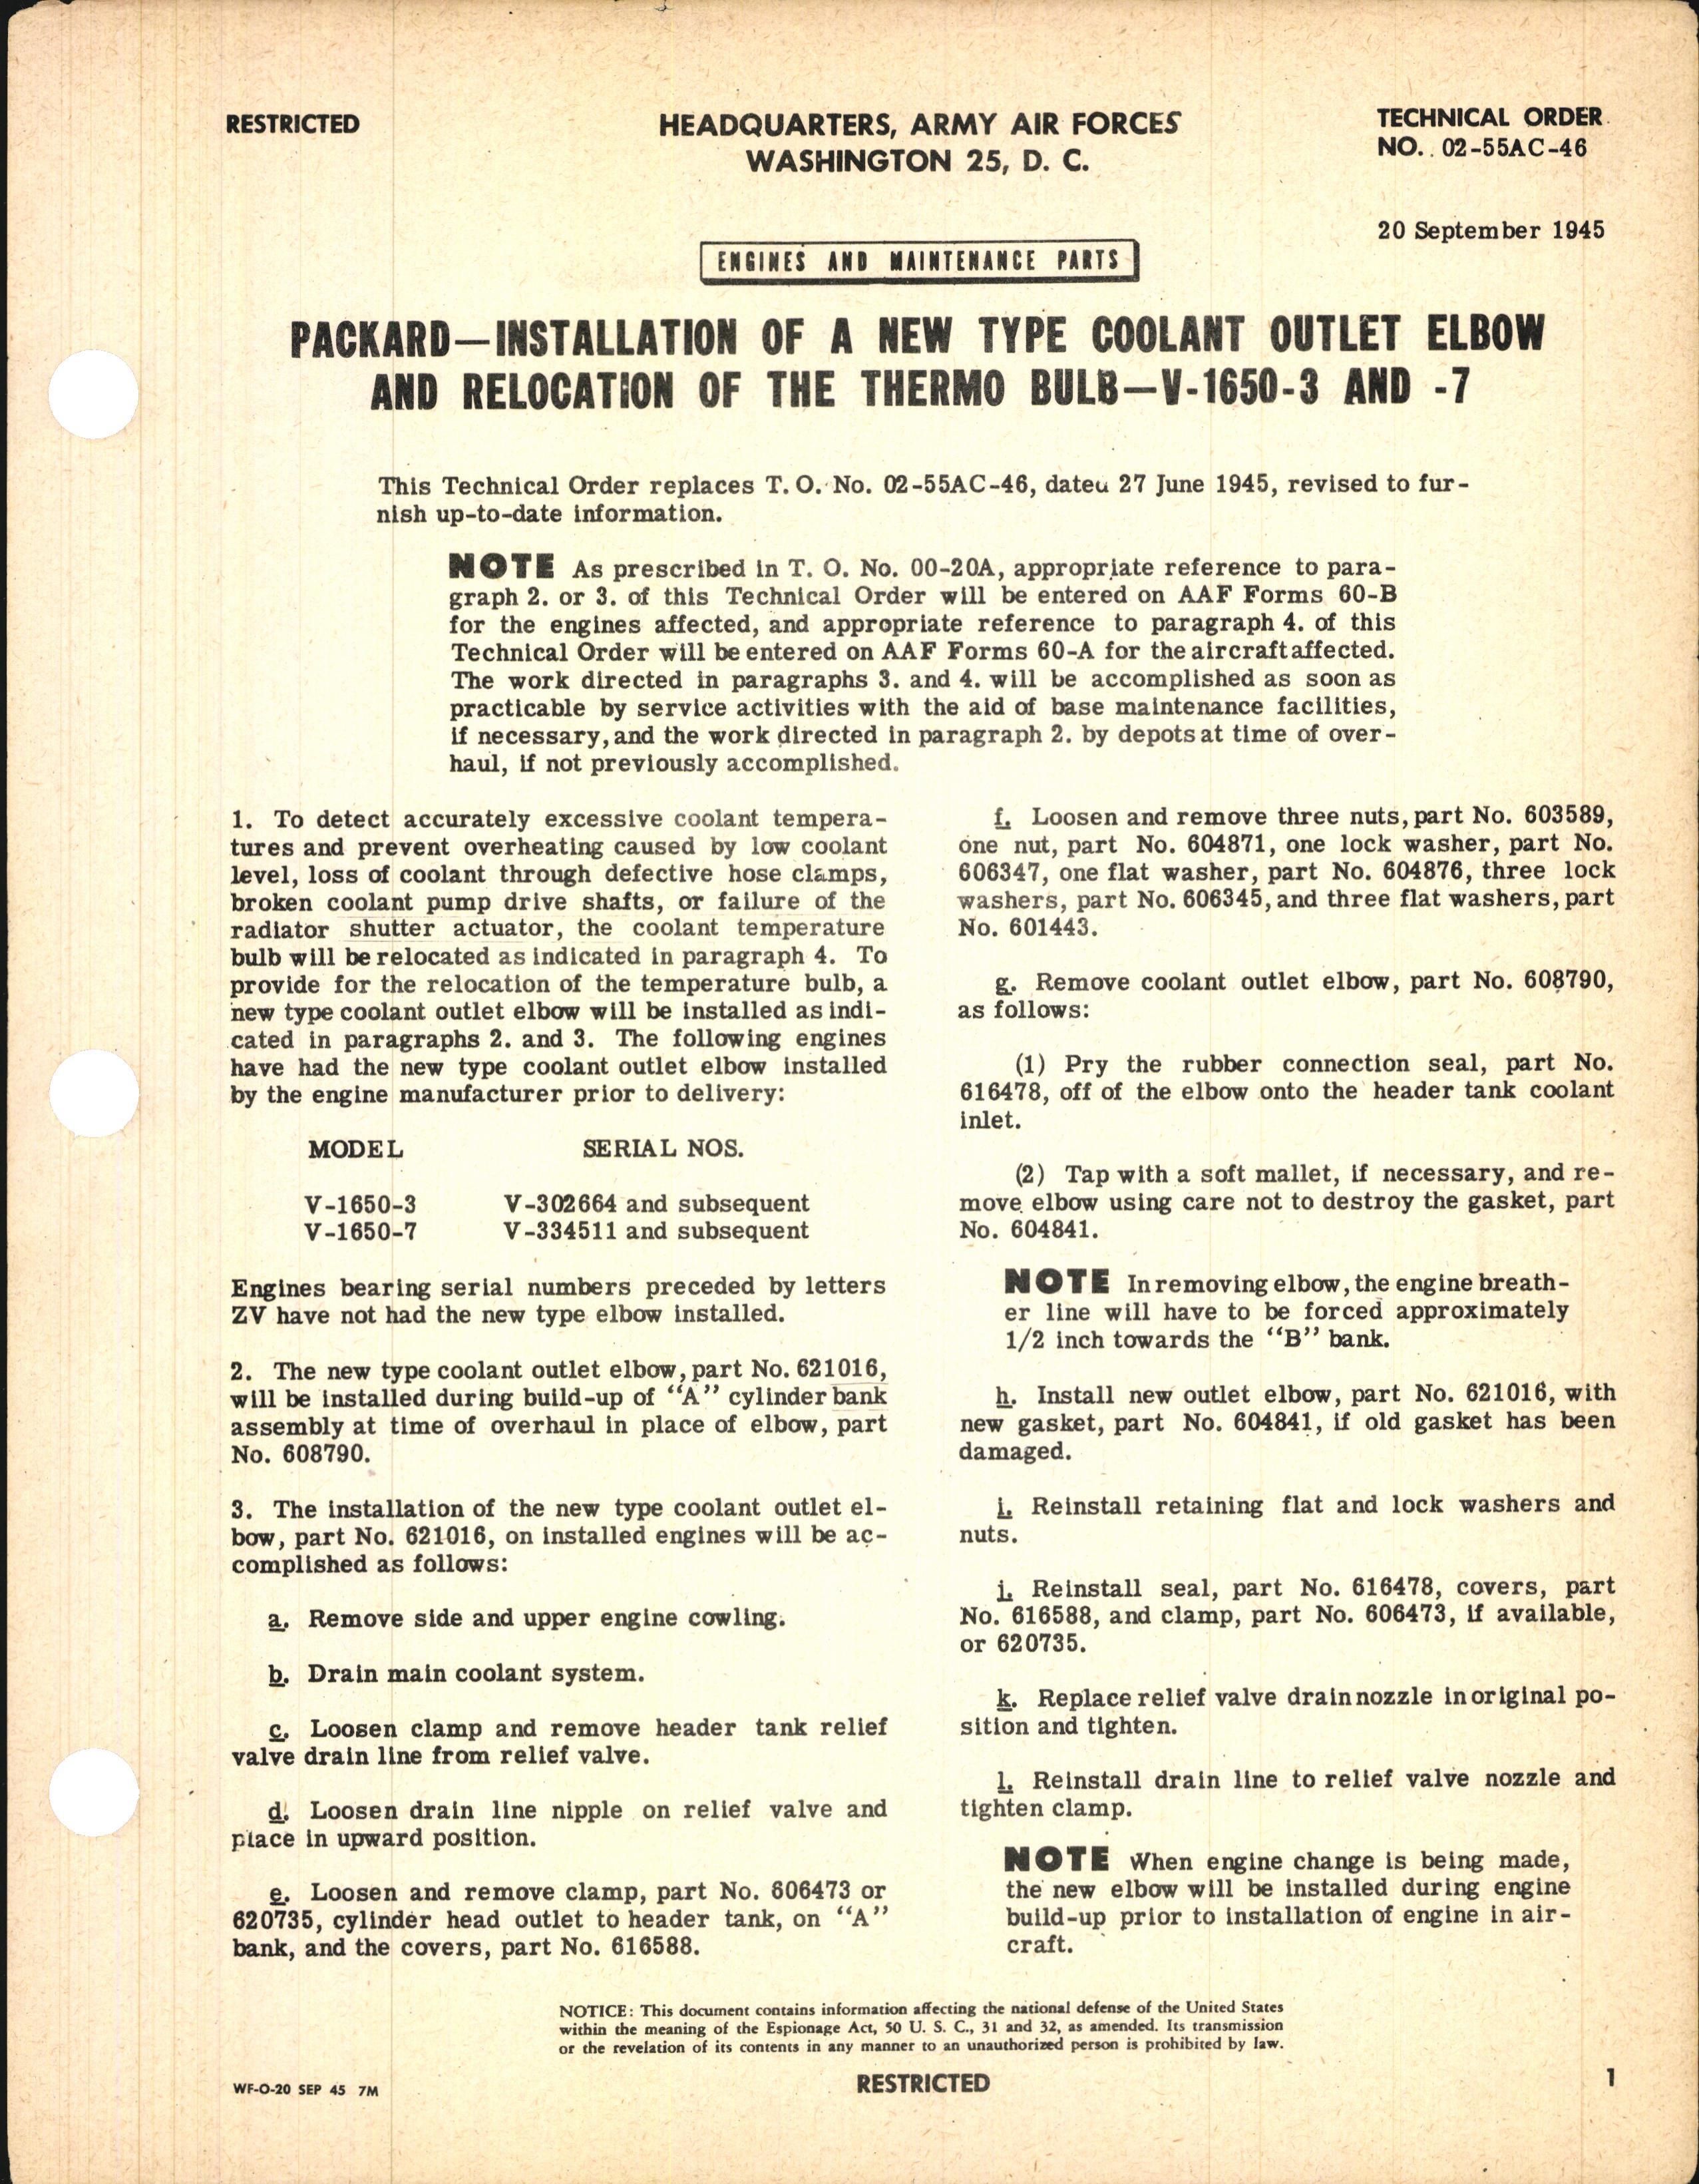 Sample page 1 from AirCorps Library document: Installation of a New Coolant Outlet Elbow and Relocation of the Thermo Bulb for V-1650-3 and -7